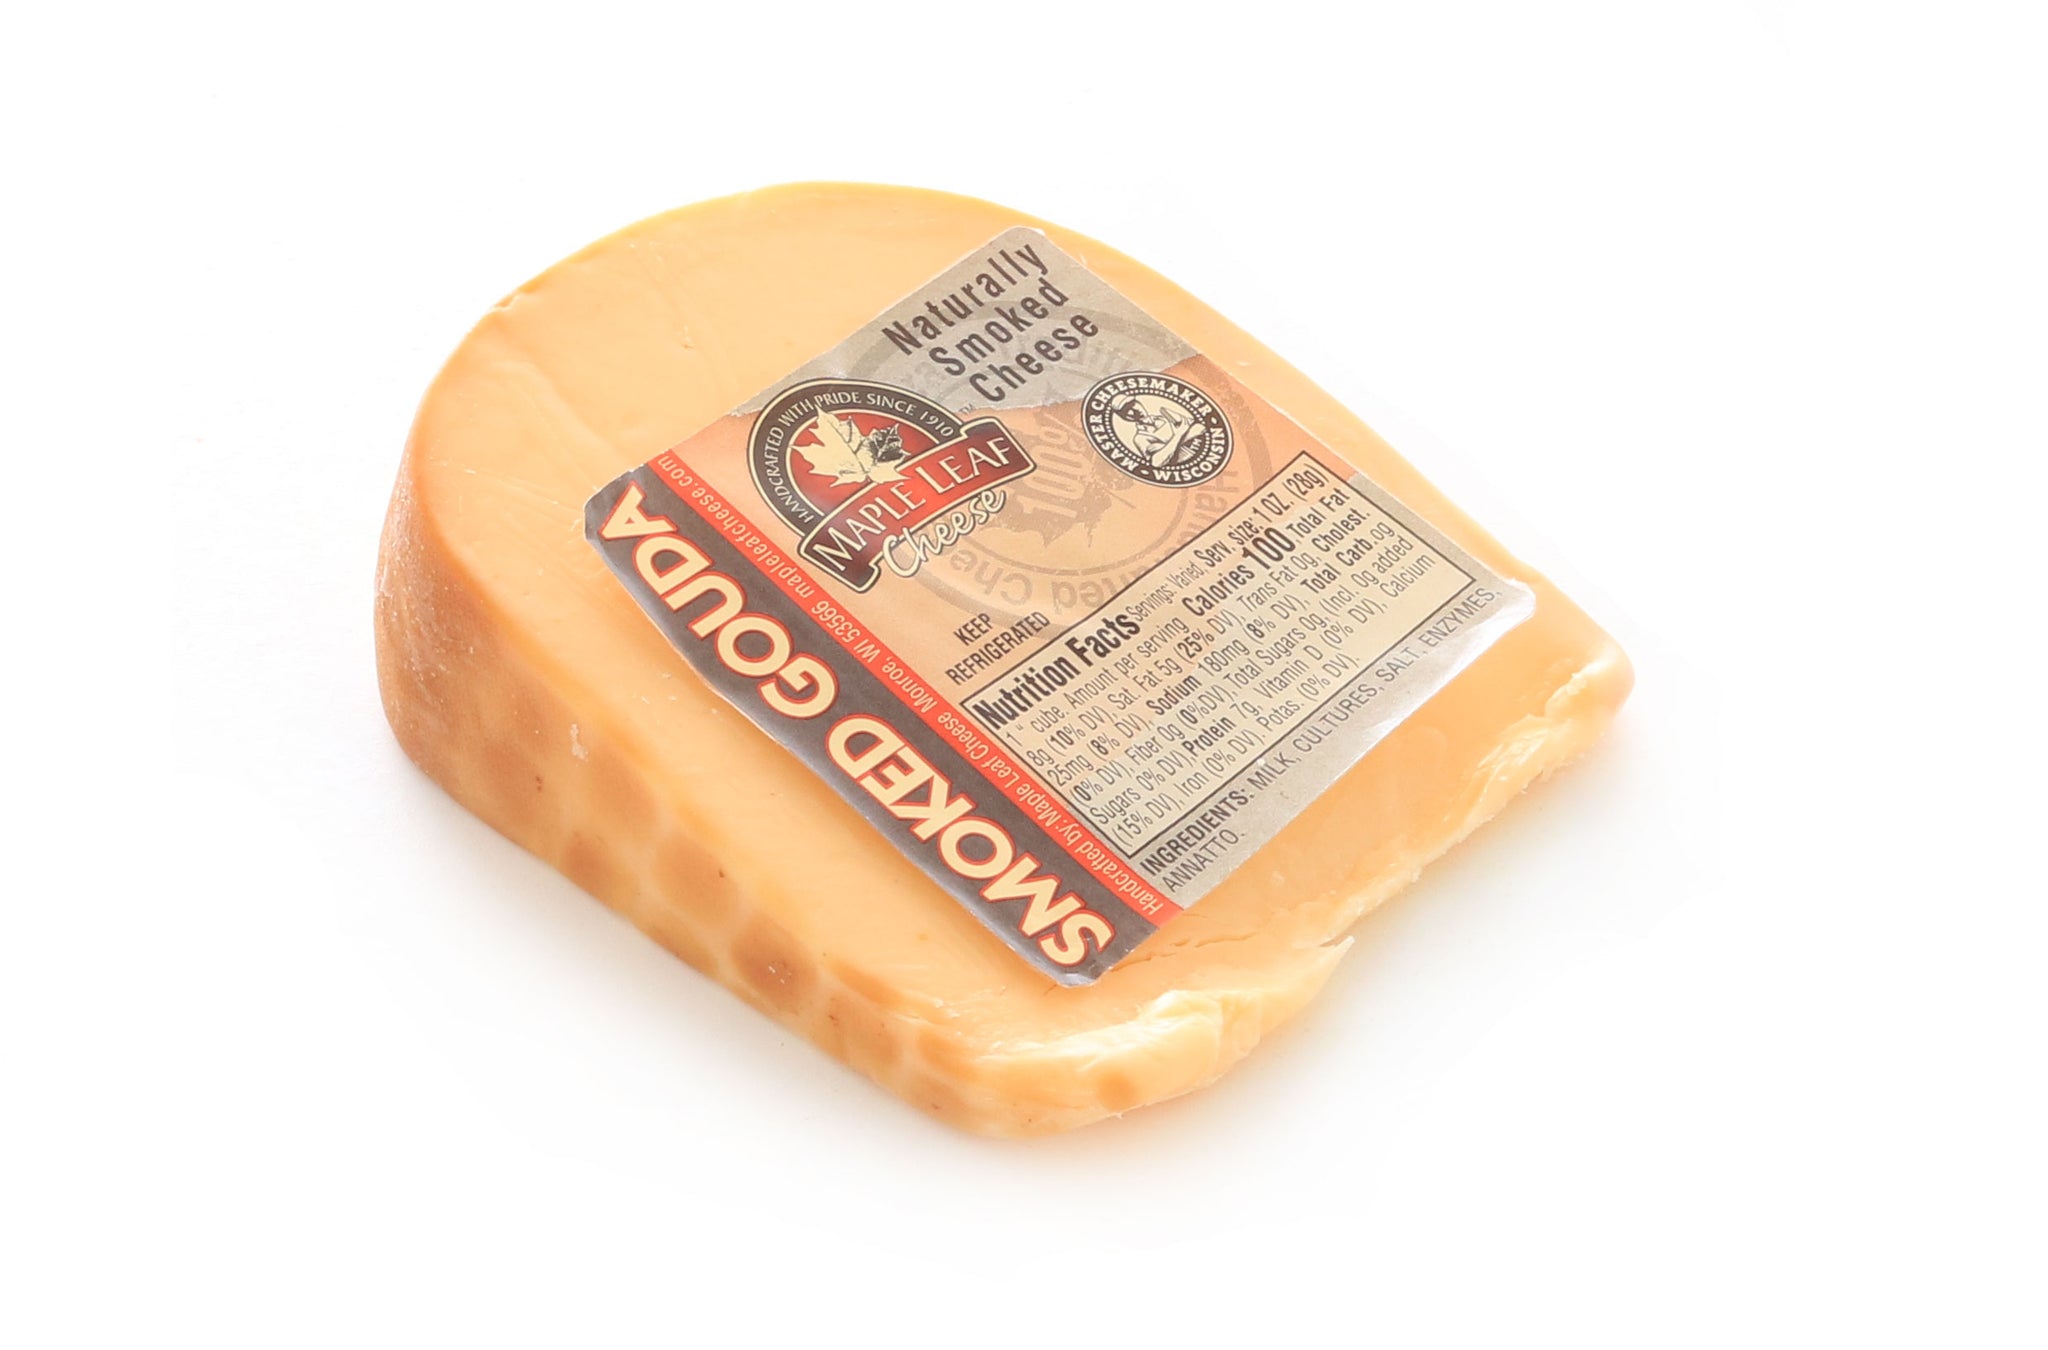 Cheese gouda Visit the